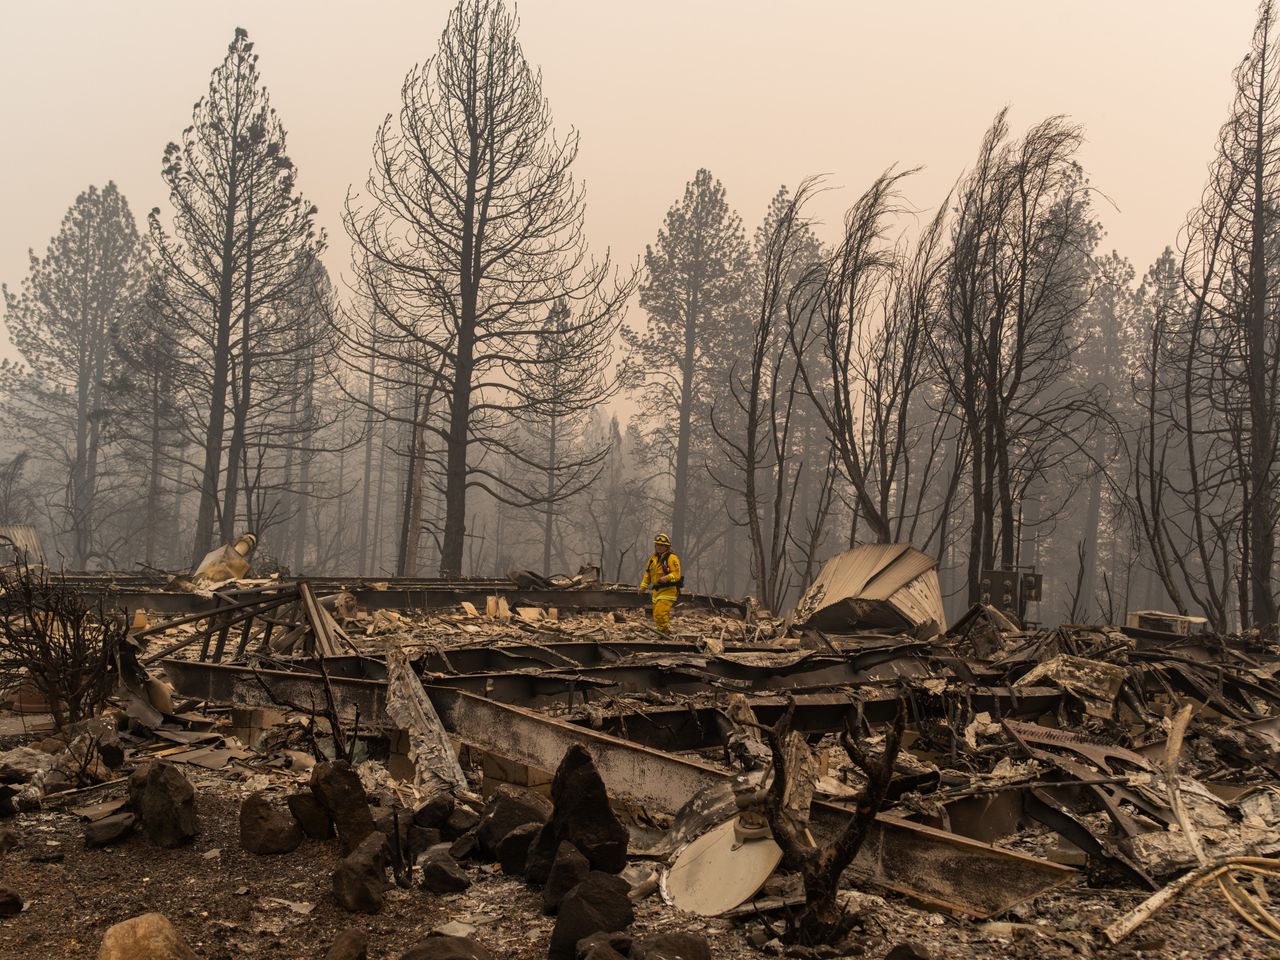 A Cal Fire firefighter assess damage at Ridgewood one week after the blaze destroyed Paradise, California.